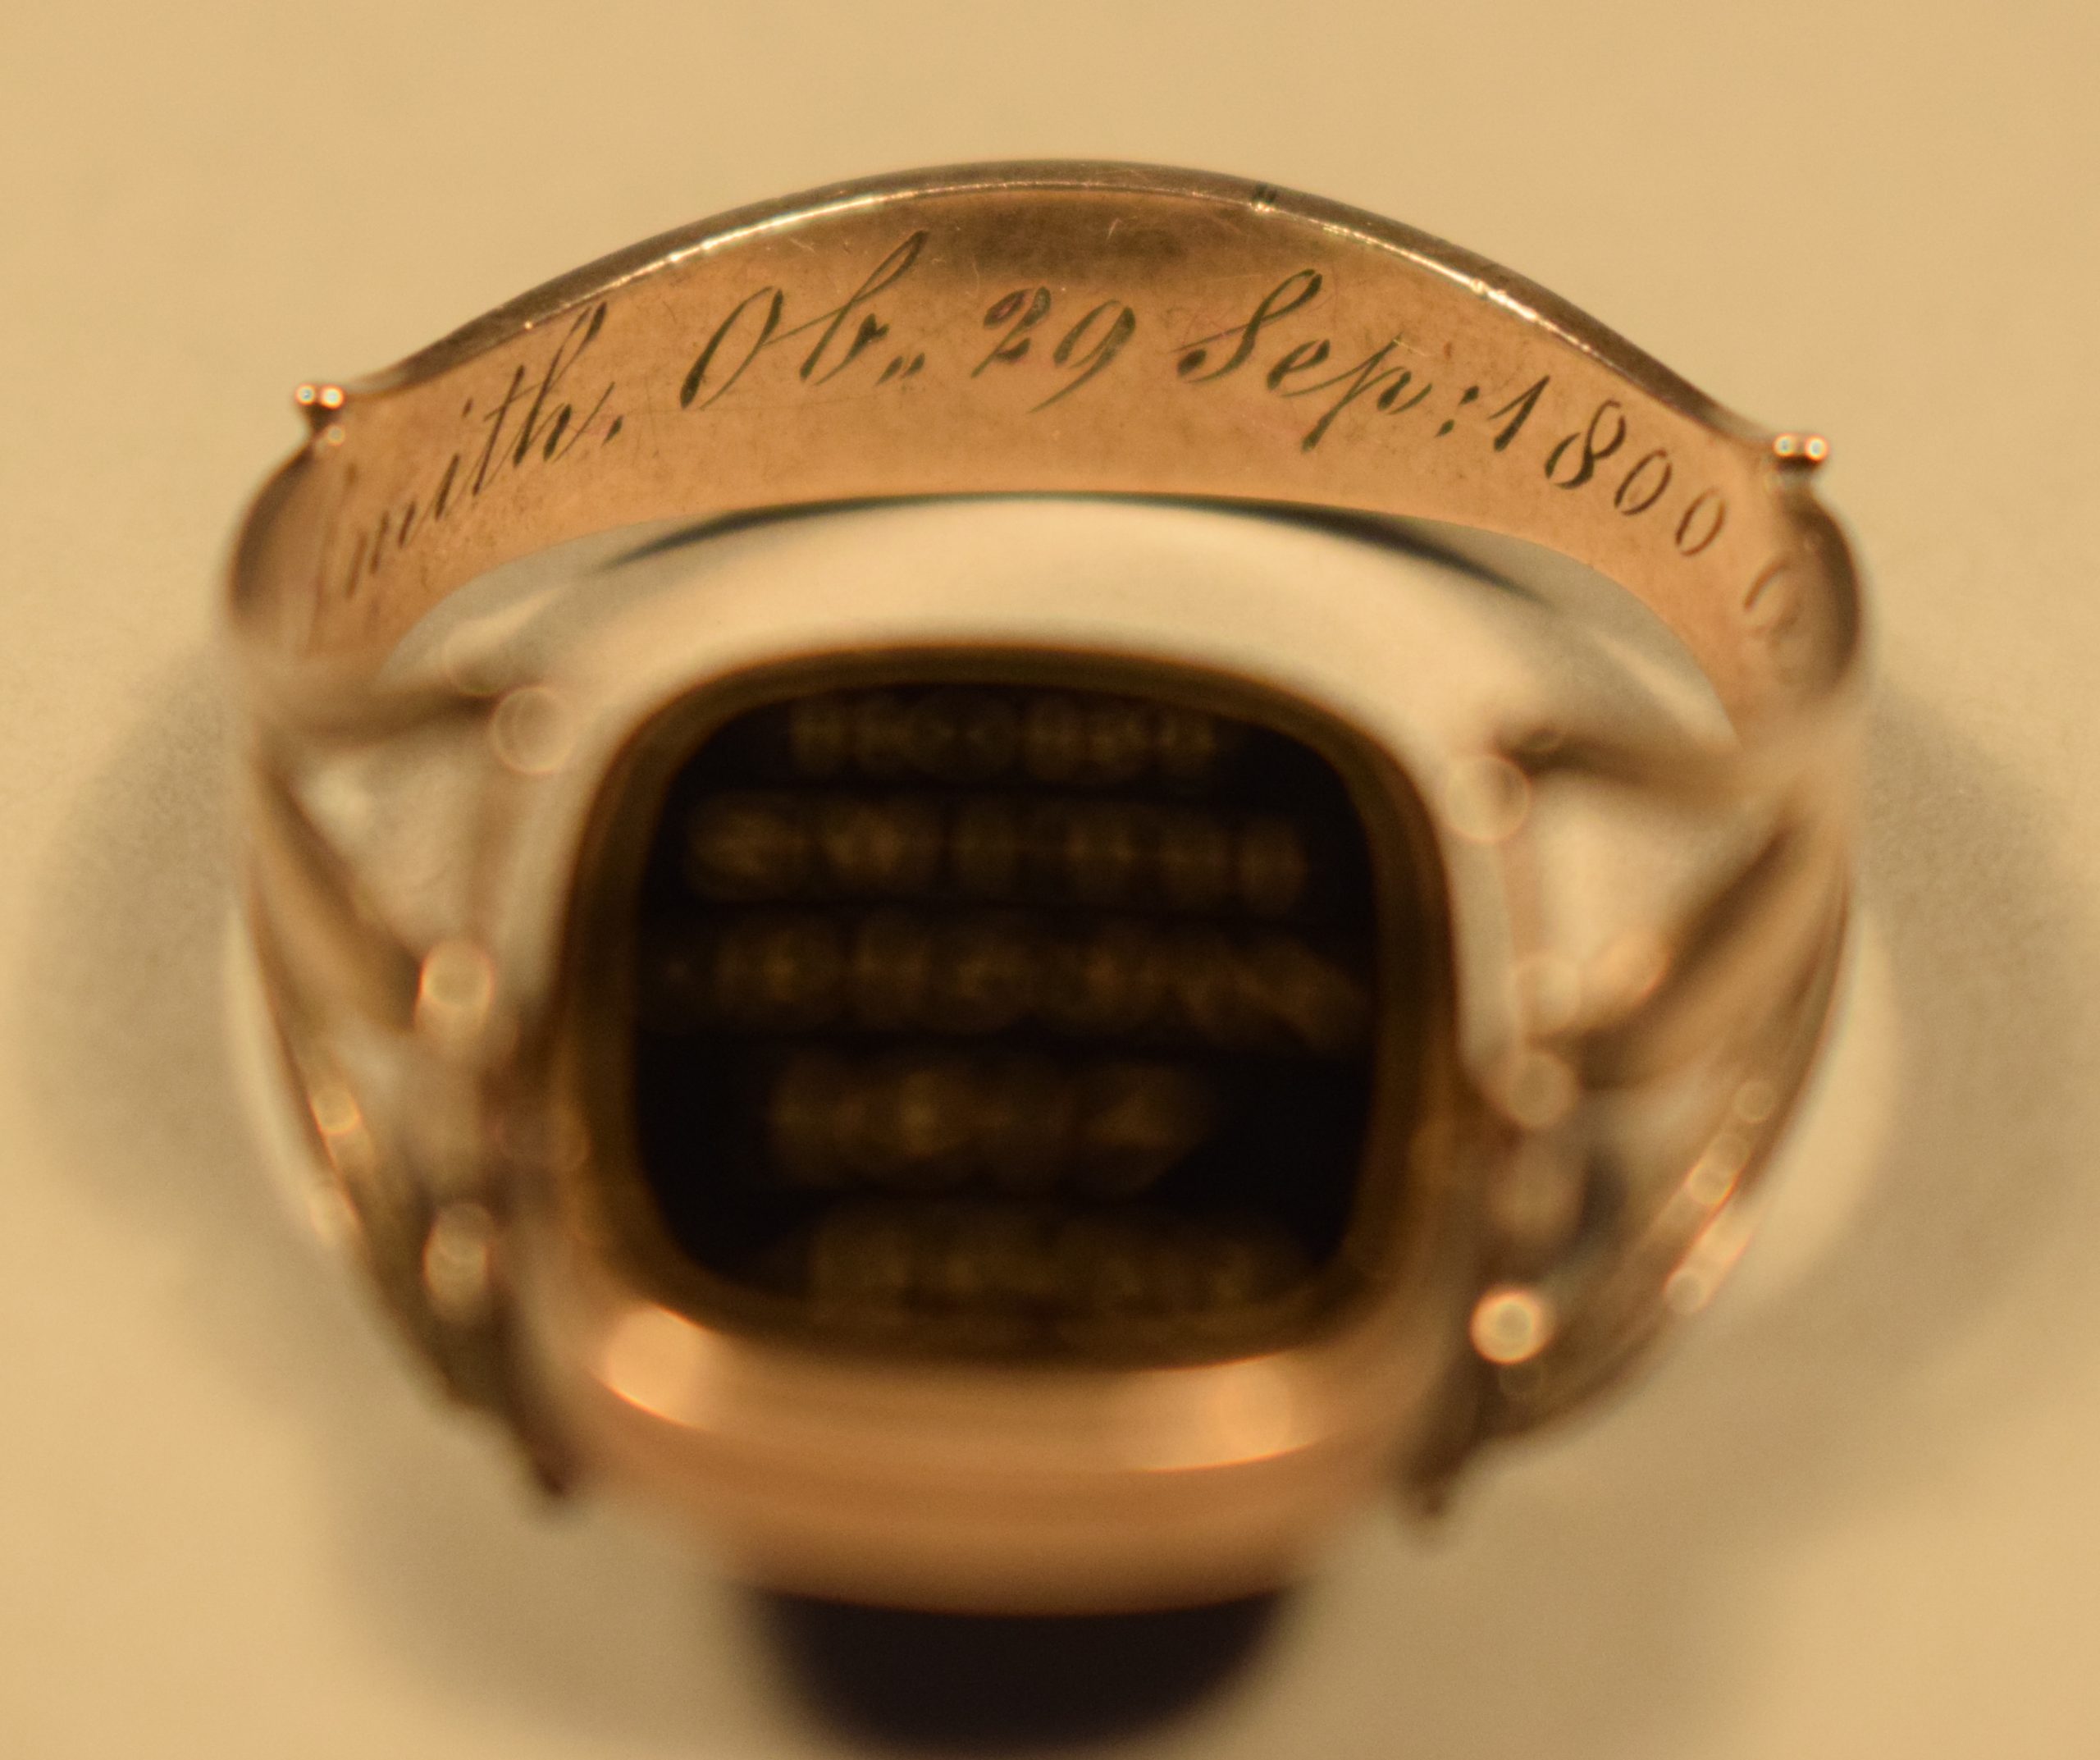 Colour photograph of a rose gold ring, inside back. The ring is gold coloured and “Smith Ob,, 29 sep : 1800” can be seen engraved on the shank (see photograph 4.1.4 for the continuation). The background of the photo is beige.